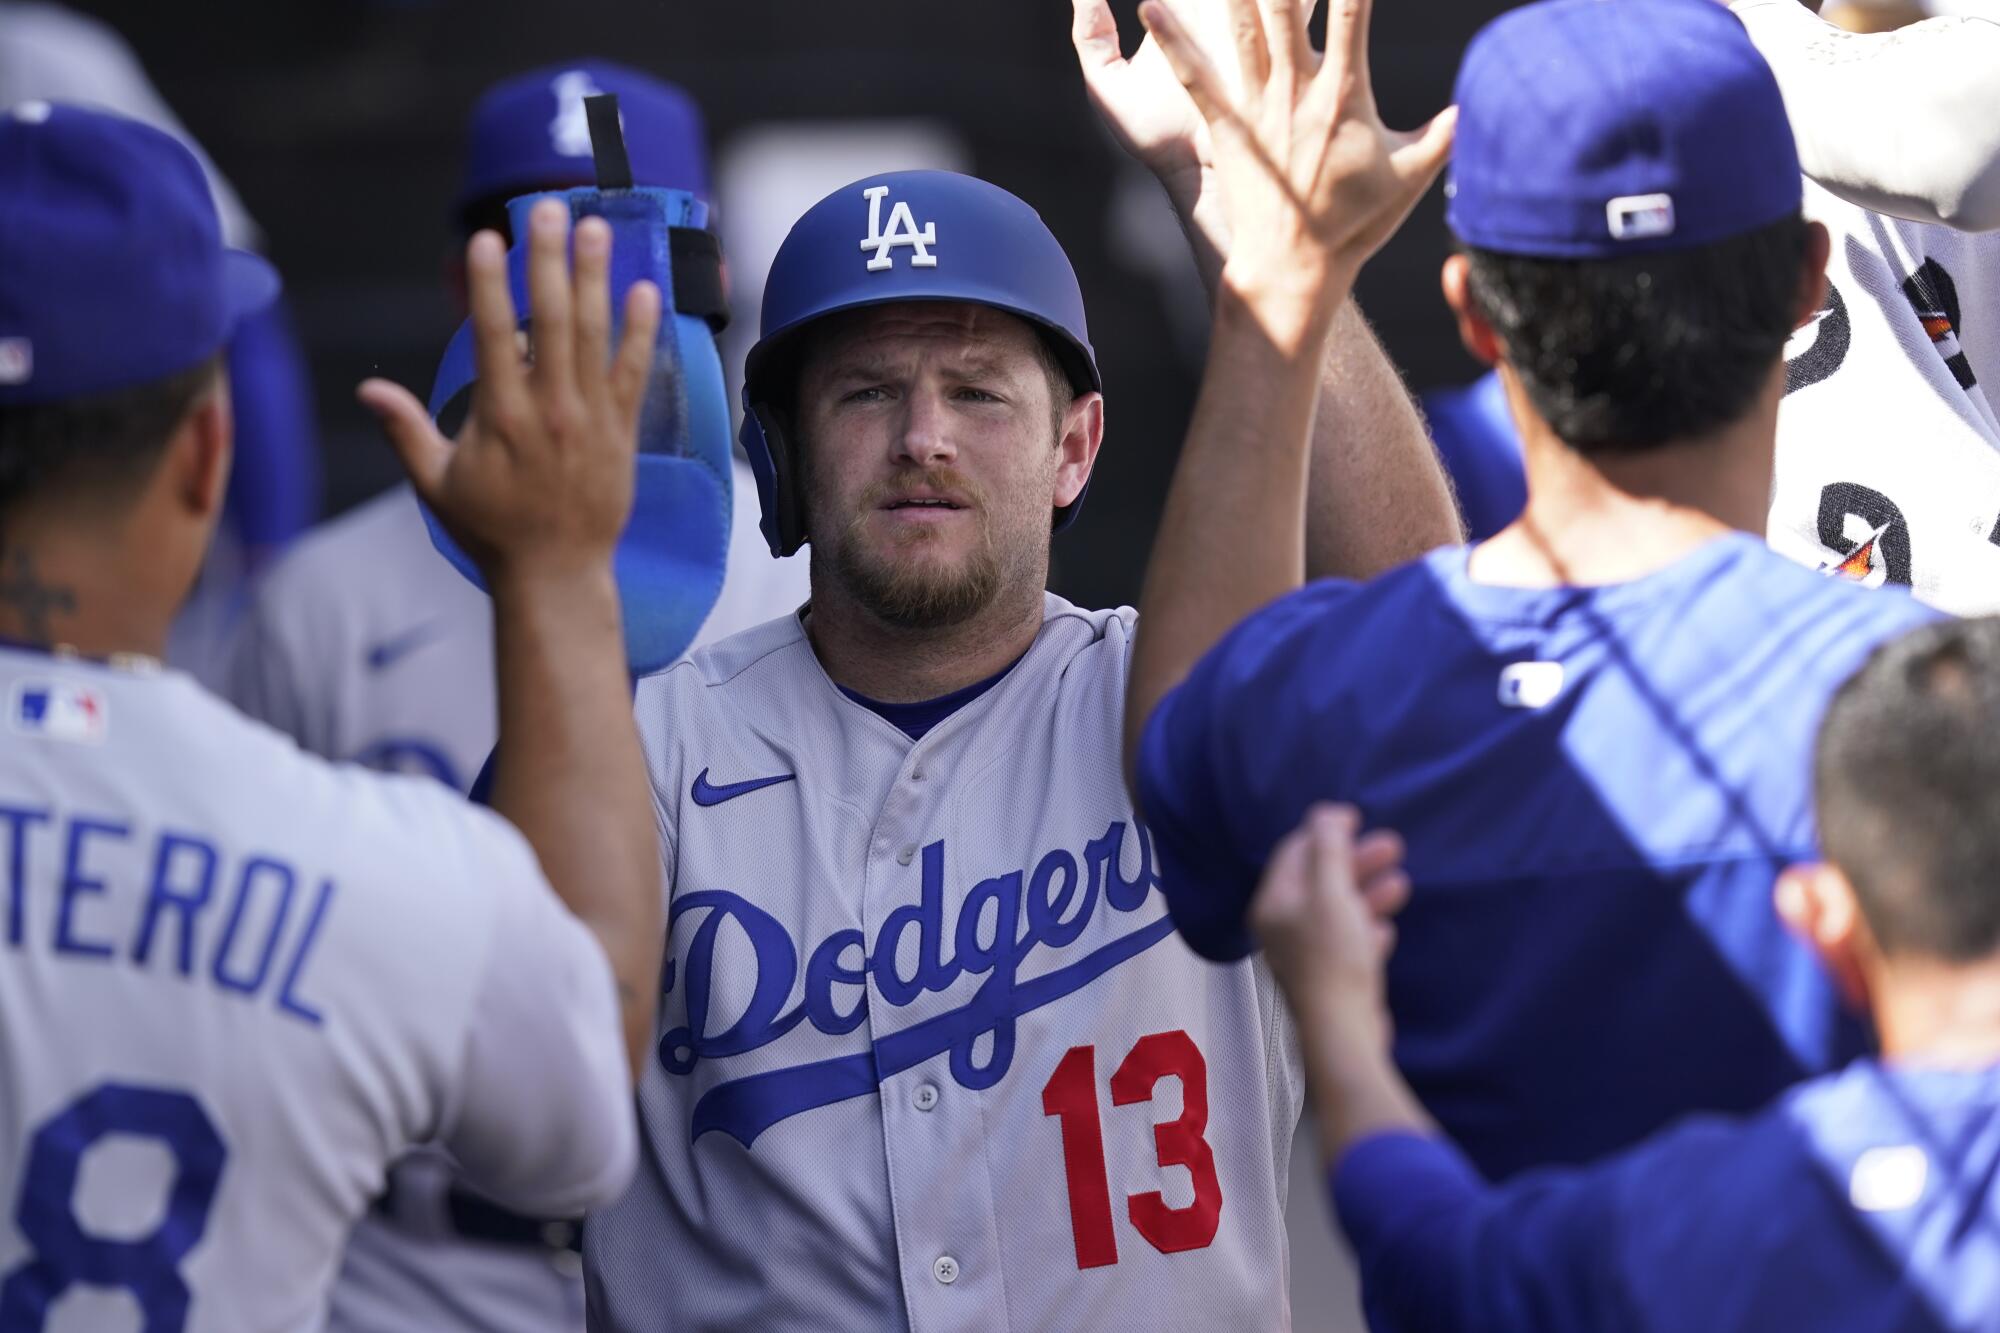 Max Muncy celebrates with teammates in the dugout after scoring on a wild pitch.